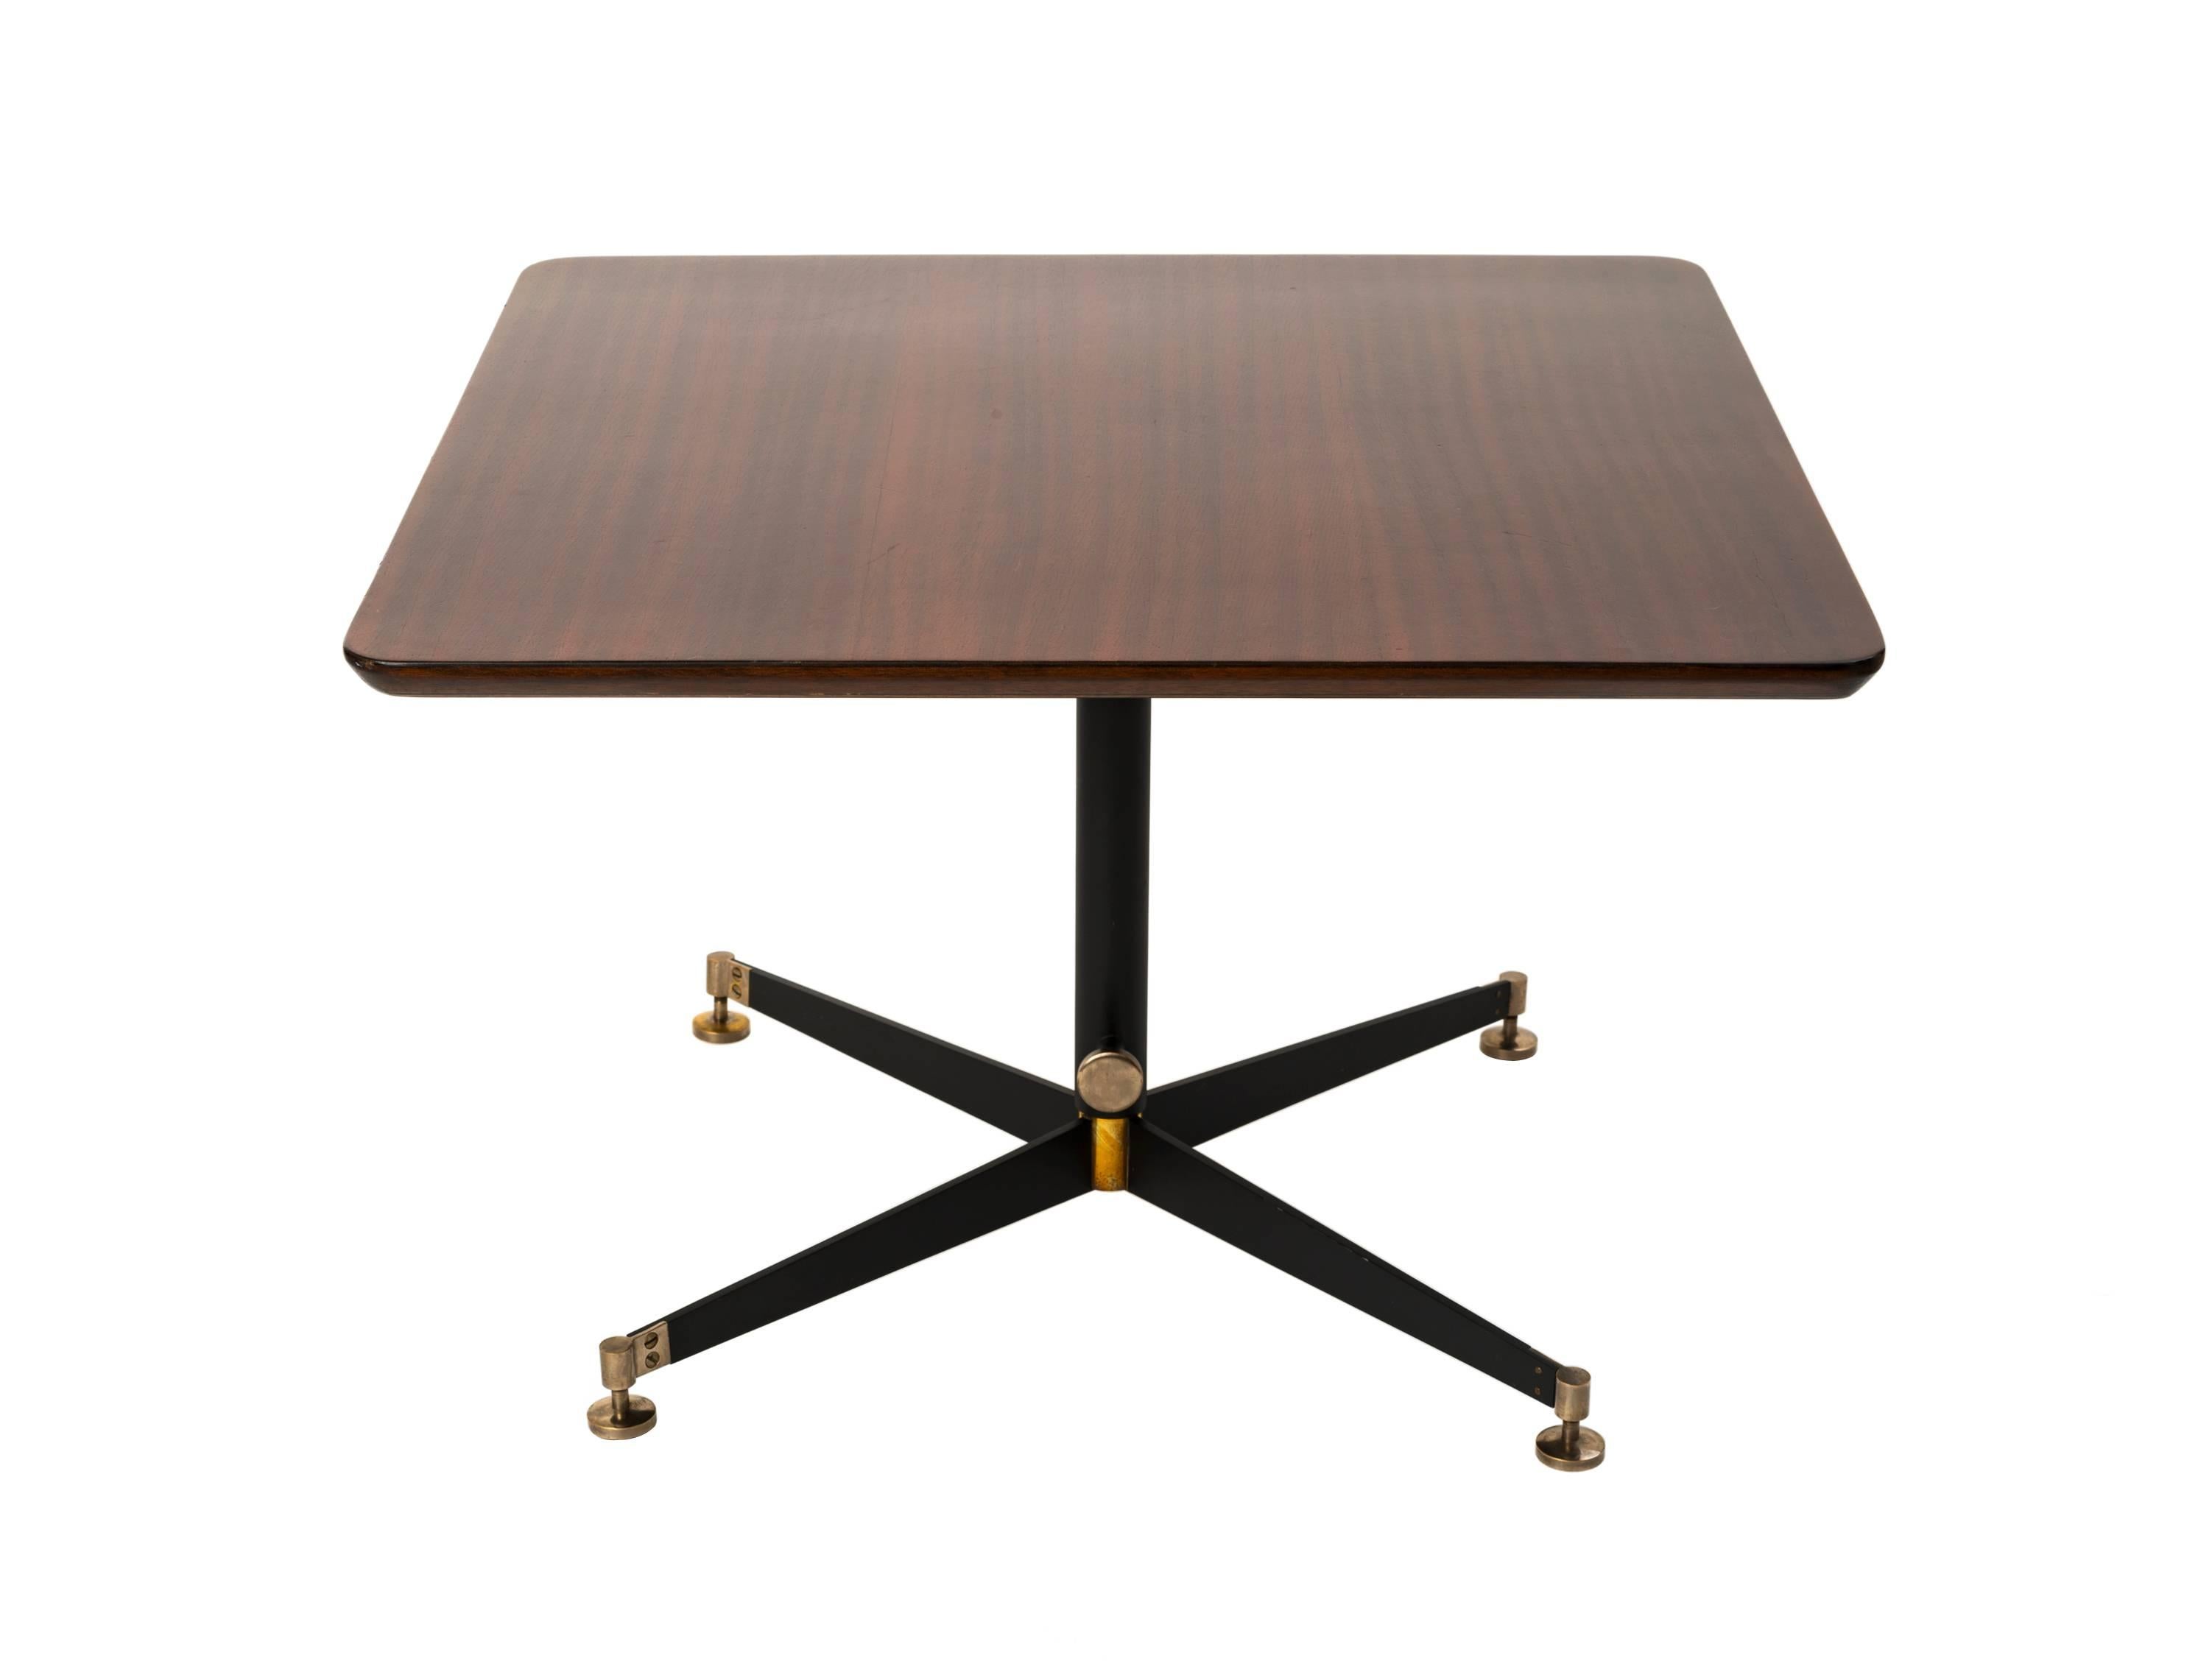 Model T5 adjustable height cocktail table, small dining table, or game table designed by Italian architect, Ignazio Gardella for Azucena, circa 1949. Rich, lacquered cherry wood surface with chamfered edge supported by an enameled steel and brass